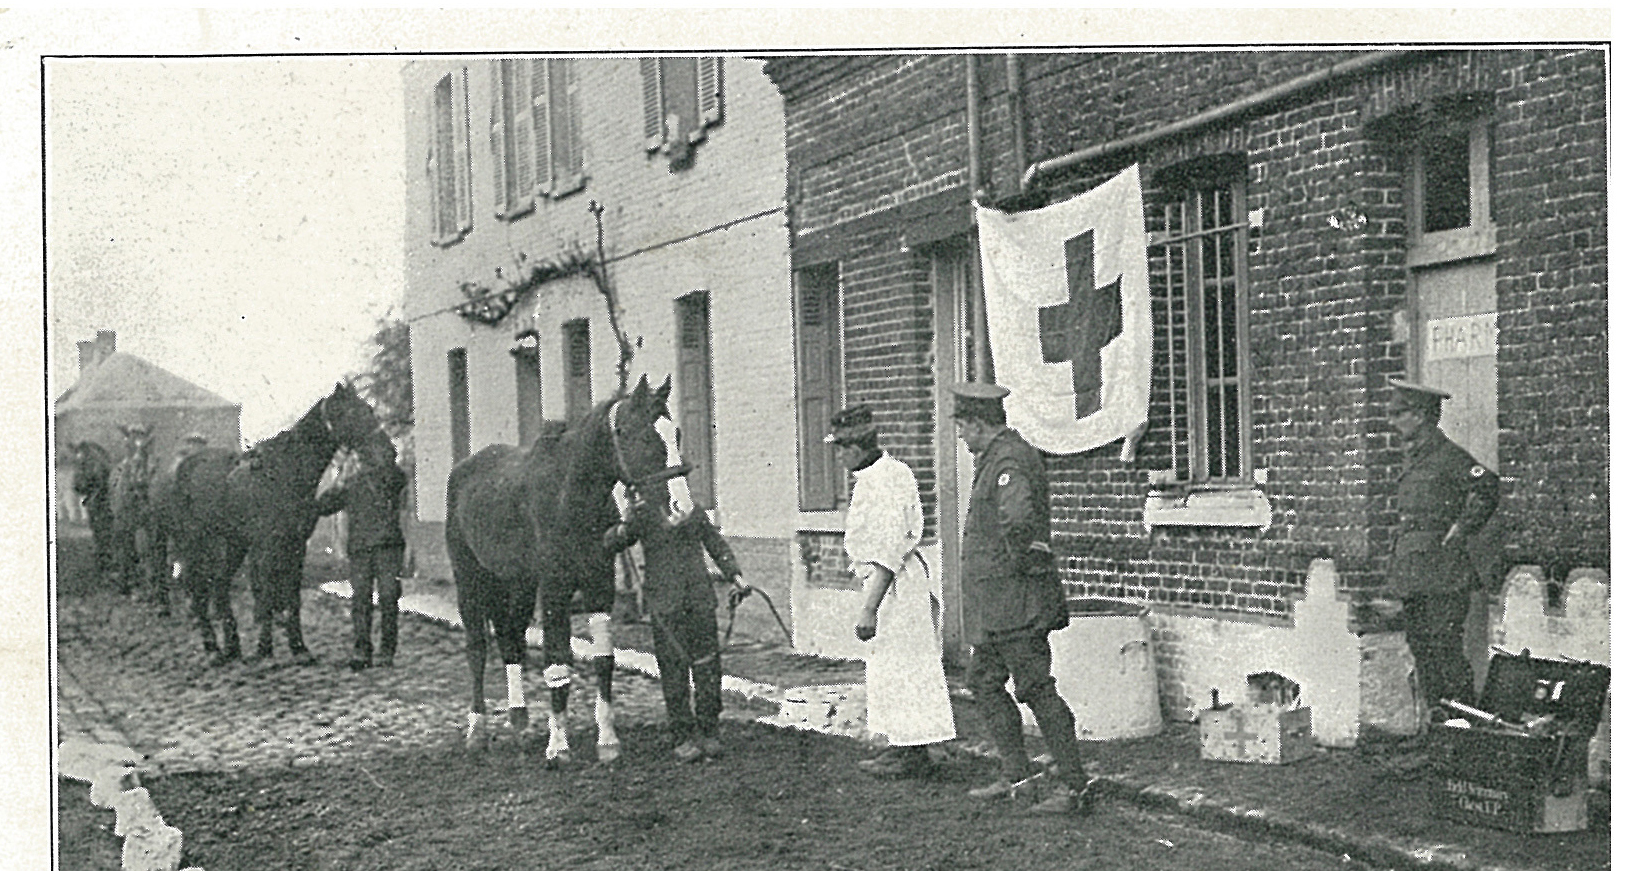 A blue cross flags hangs from a drainpipe outside a makeshift animal hospital in the First World War